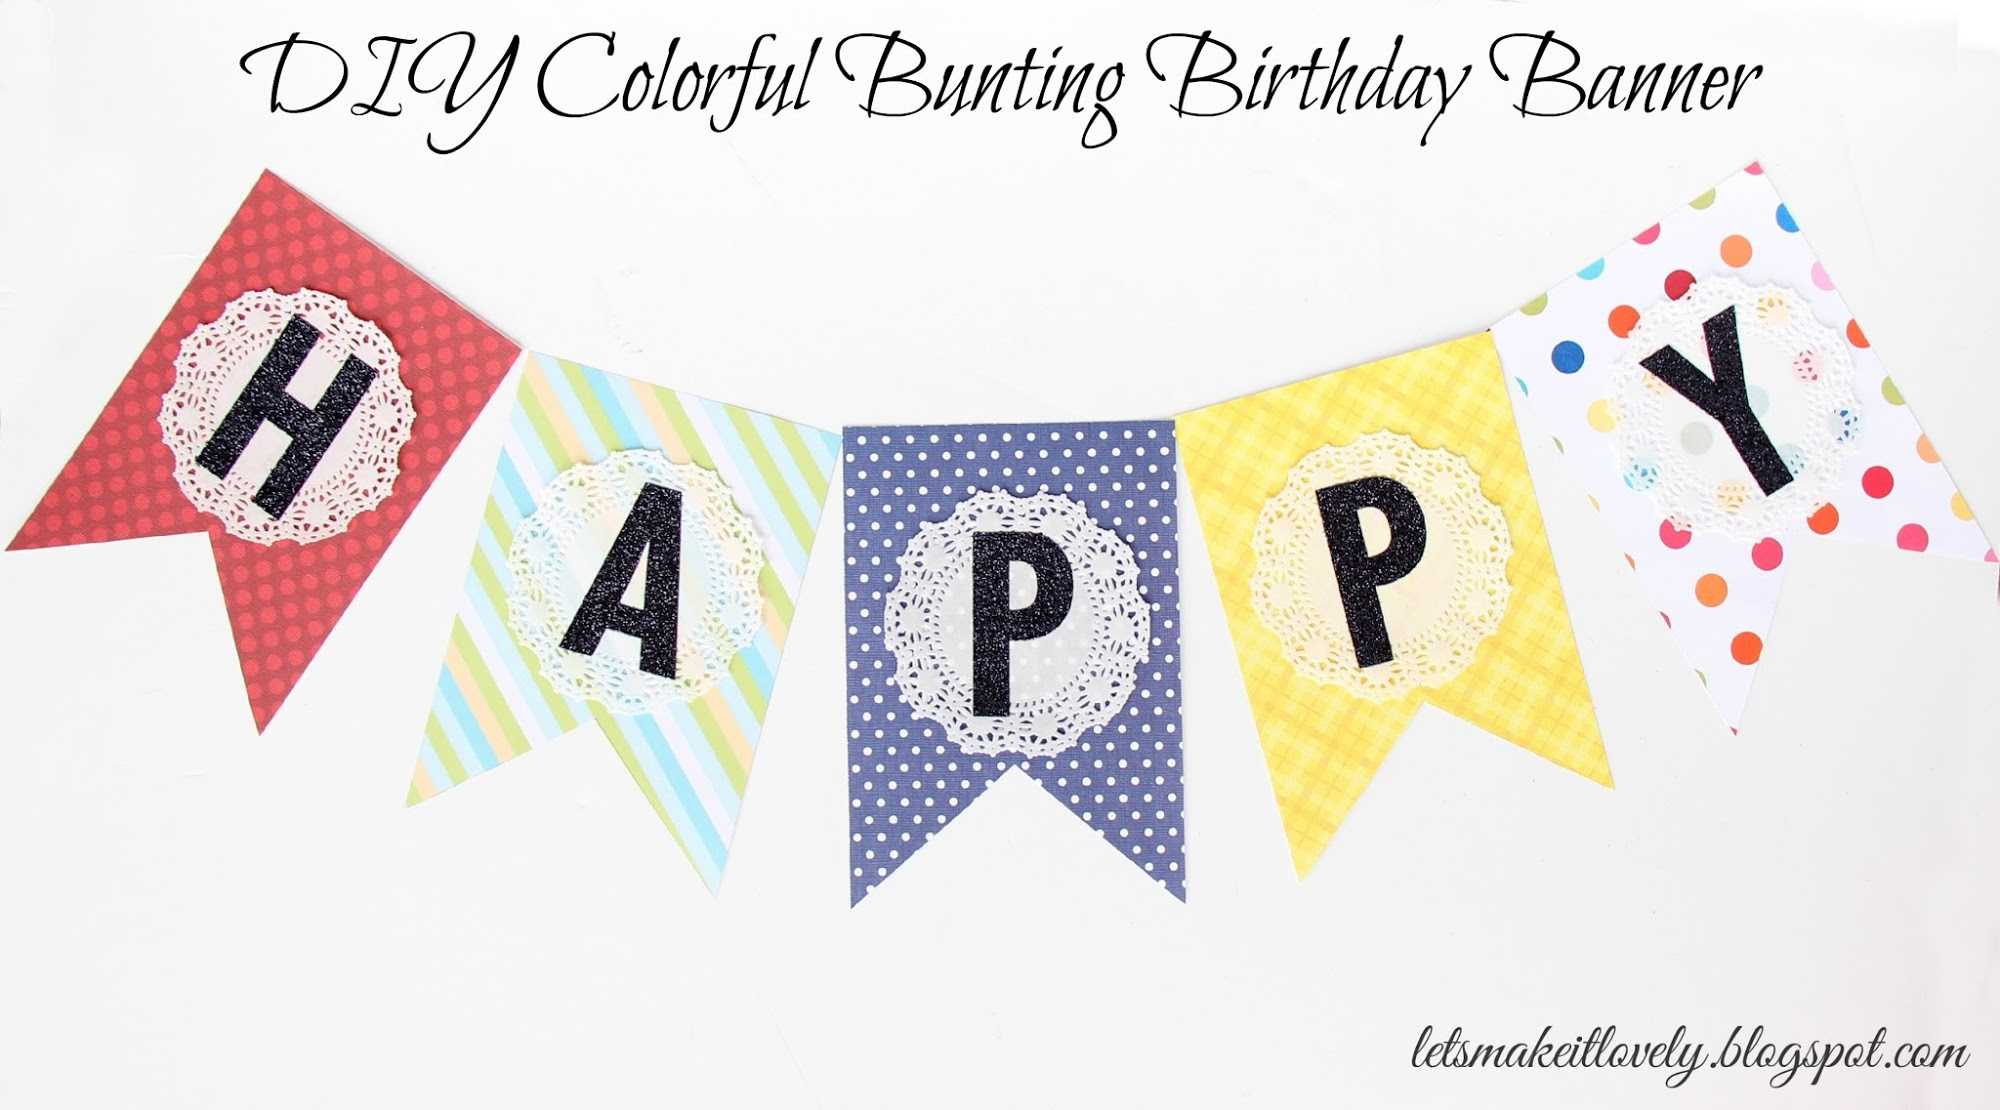 Let's Make It Lovely: Diy Colorful Bunting Birthday Banner For Diy Birthday Banner Template